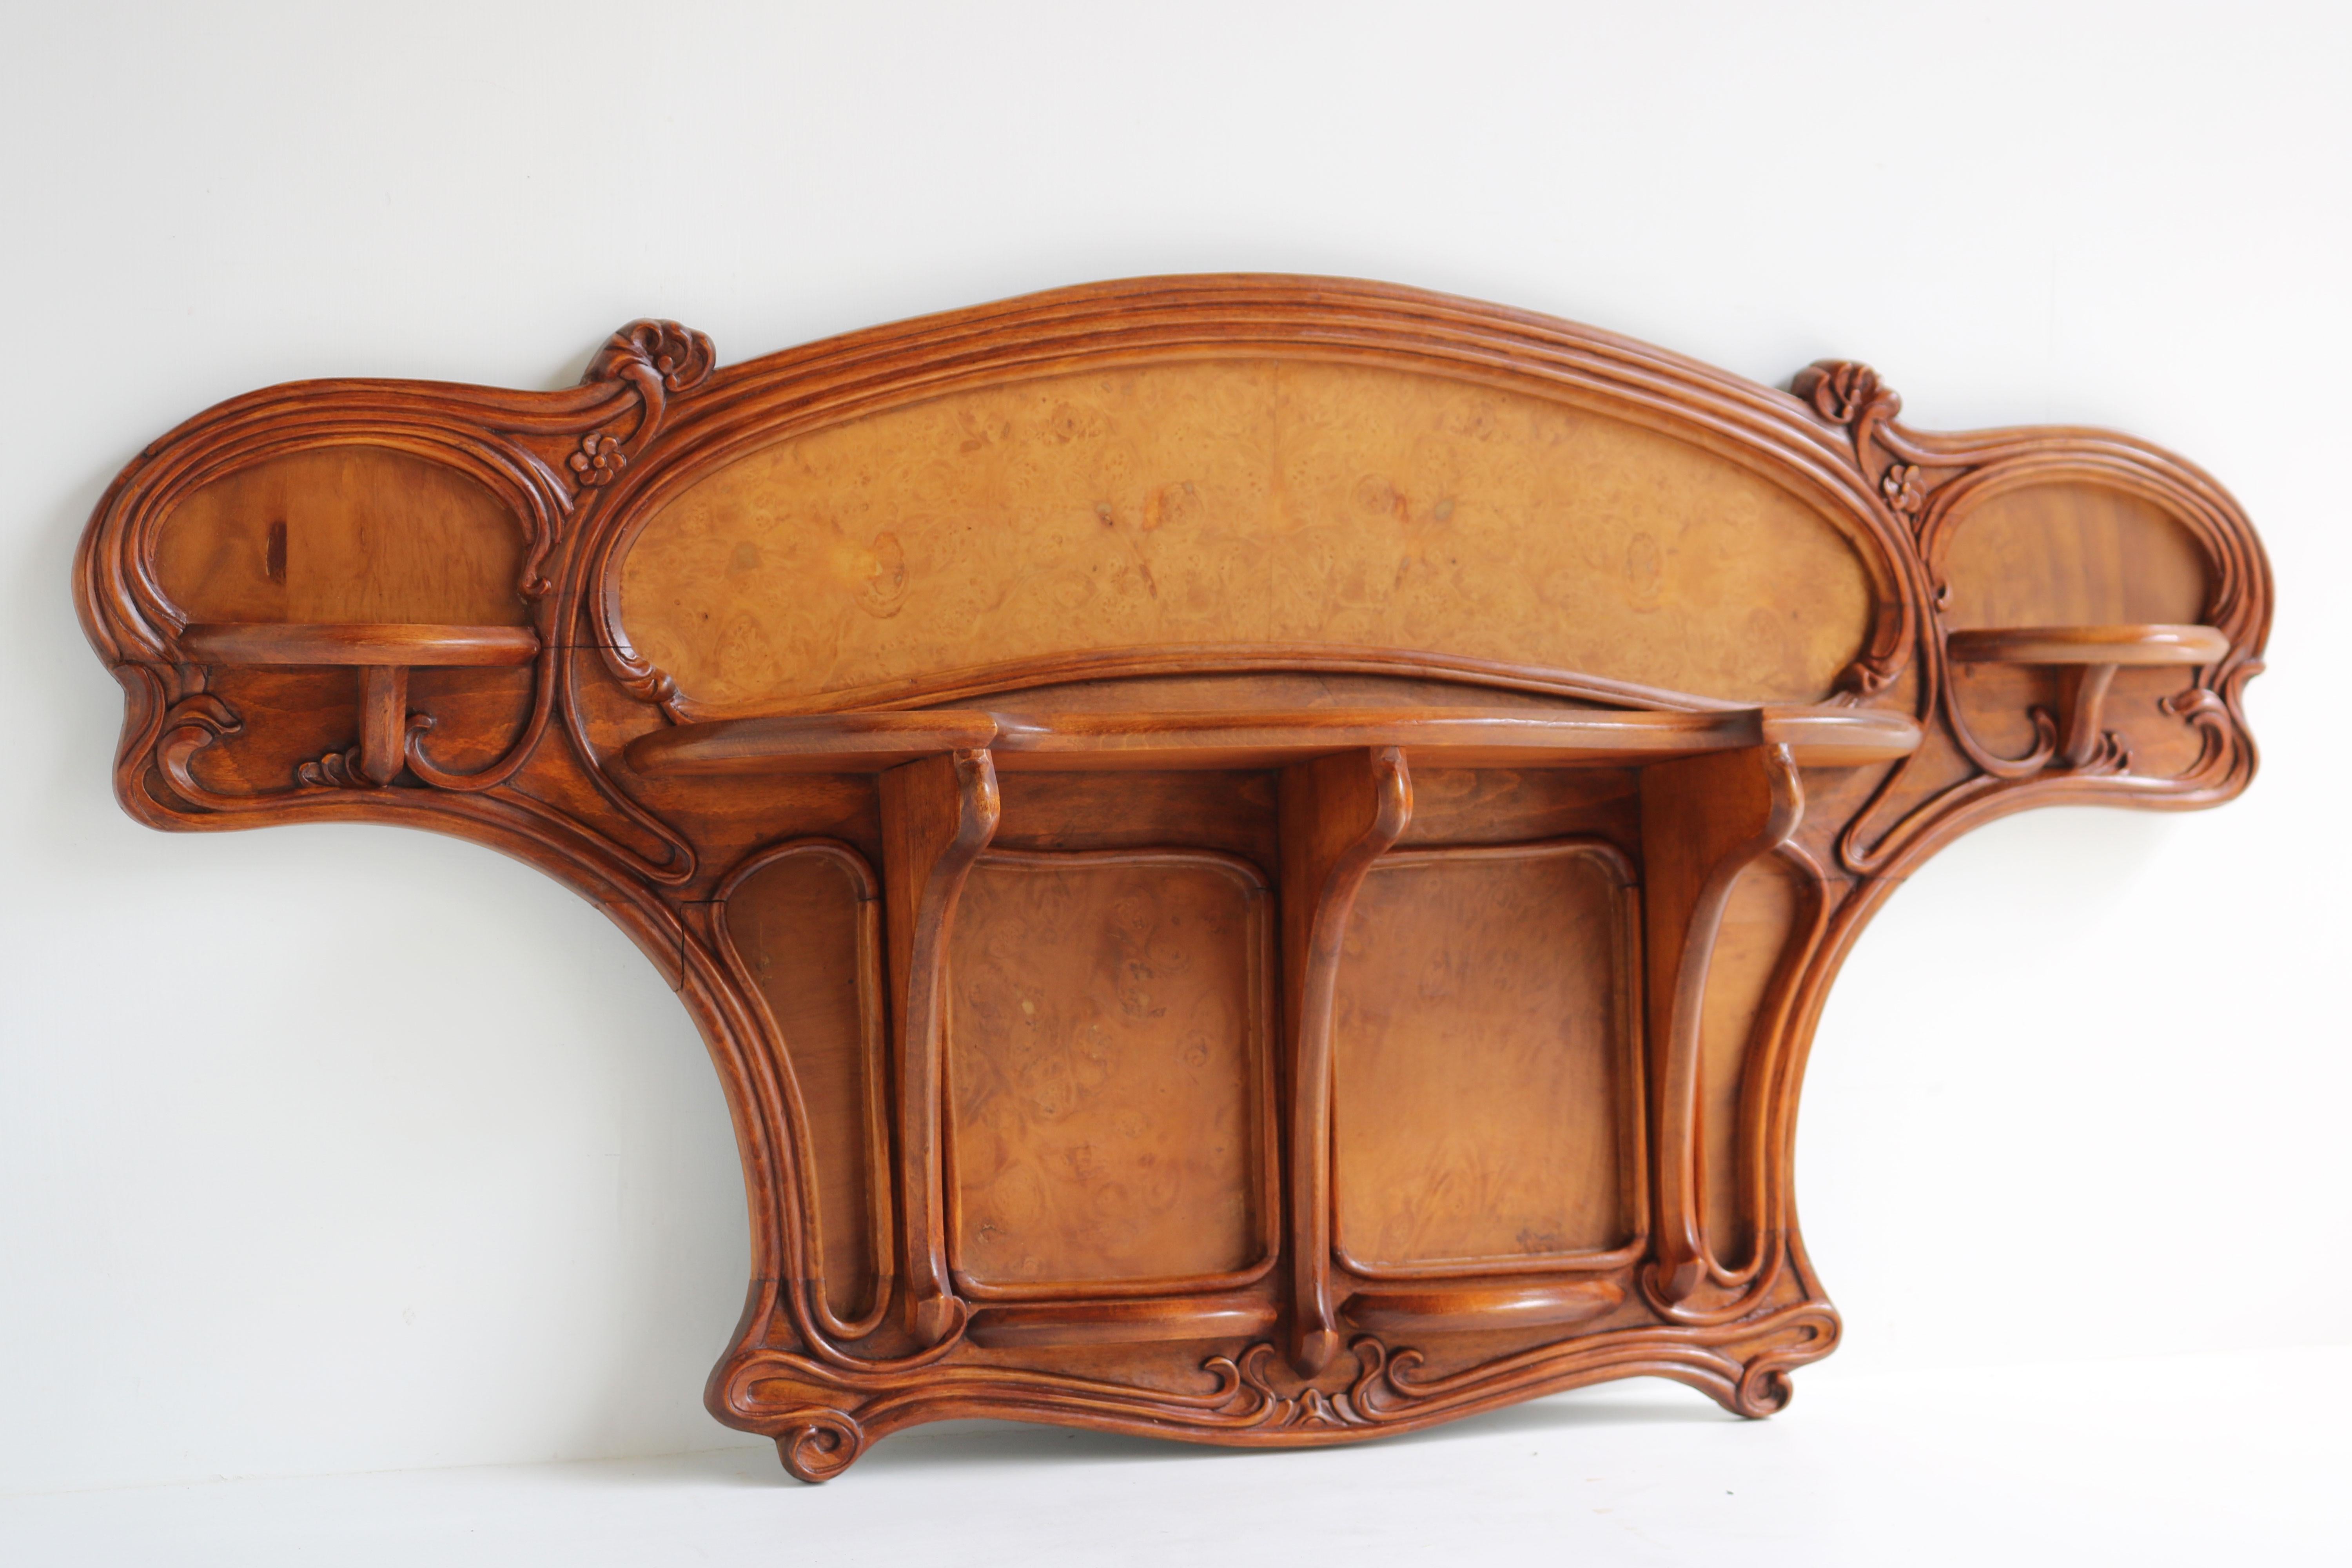 Exquisite & most rare! This French Art Nouveau wall shelf designed by art nouveau grandmaster Eugene Gaillard circa 1900. 
Superb organic design with floral carved decorations , made from solid walnut hand-carved and decorated with lemon wood